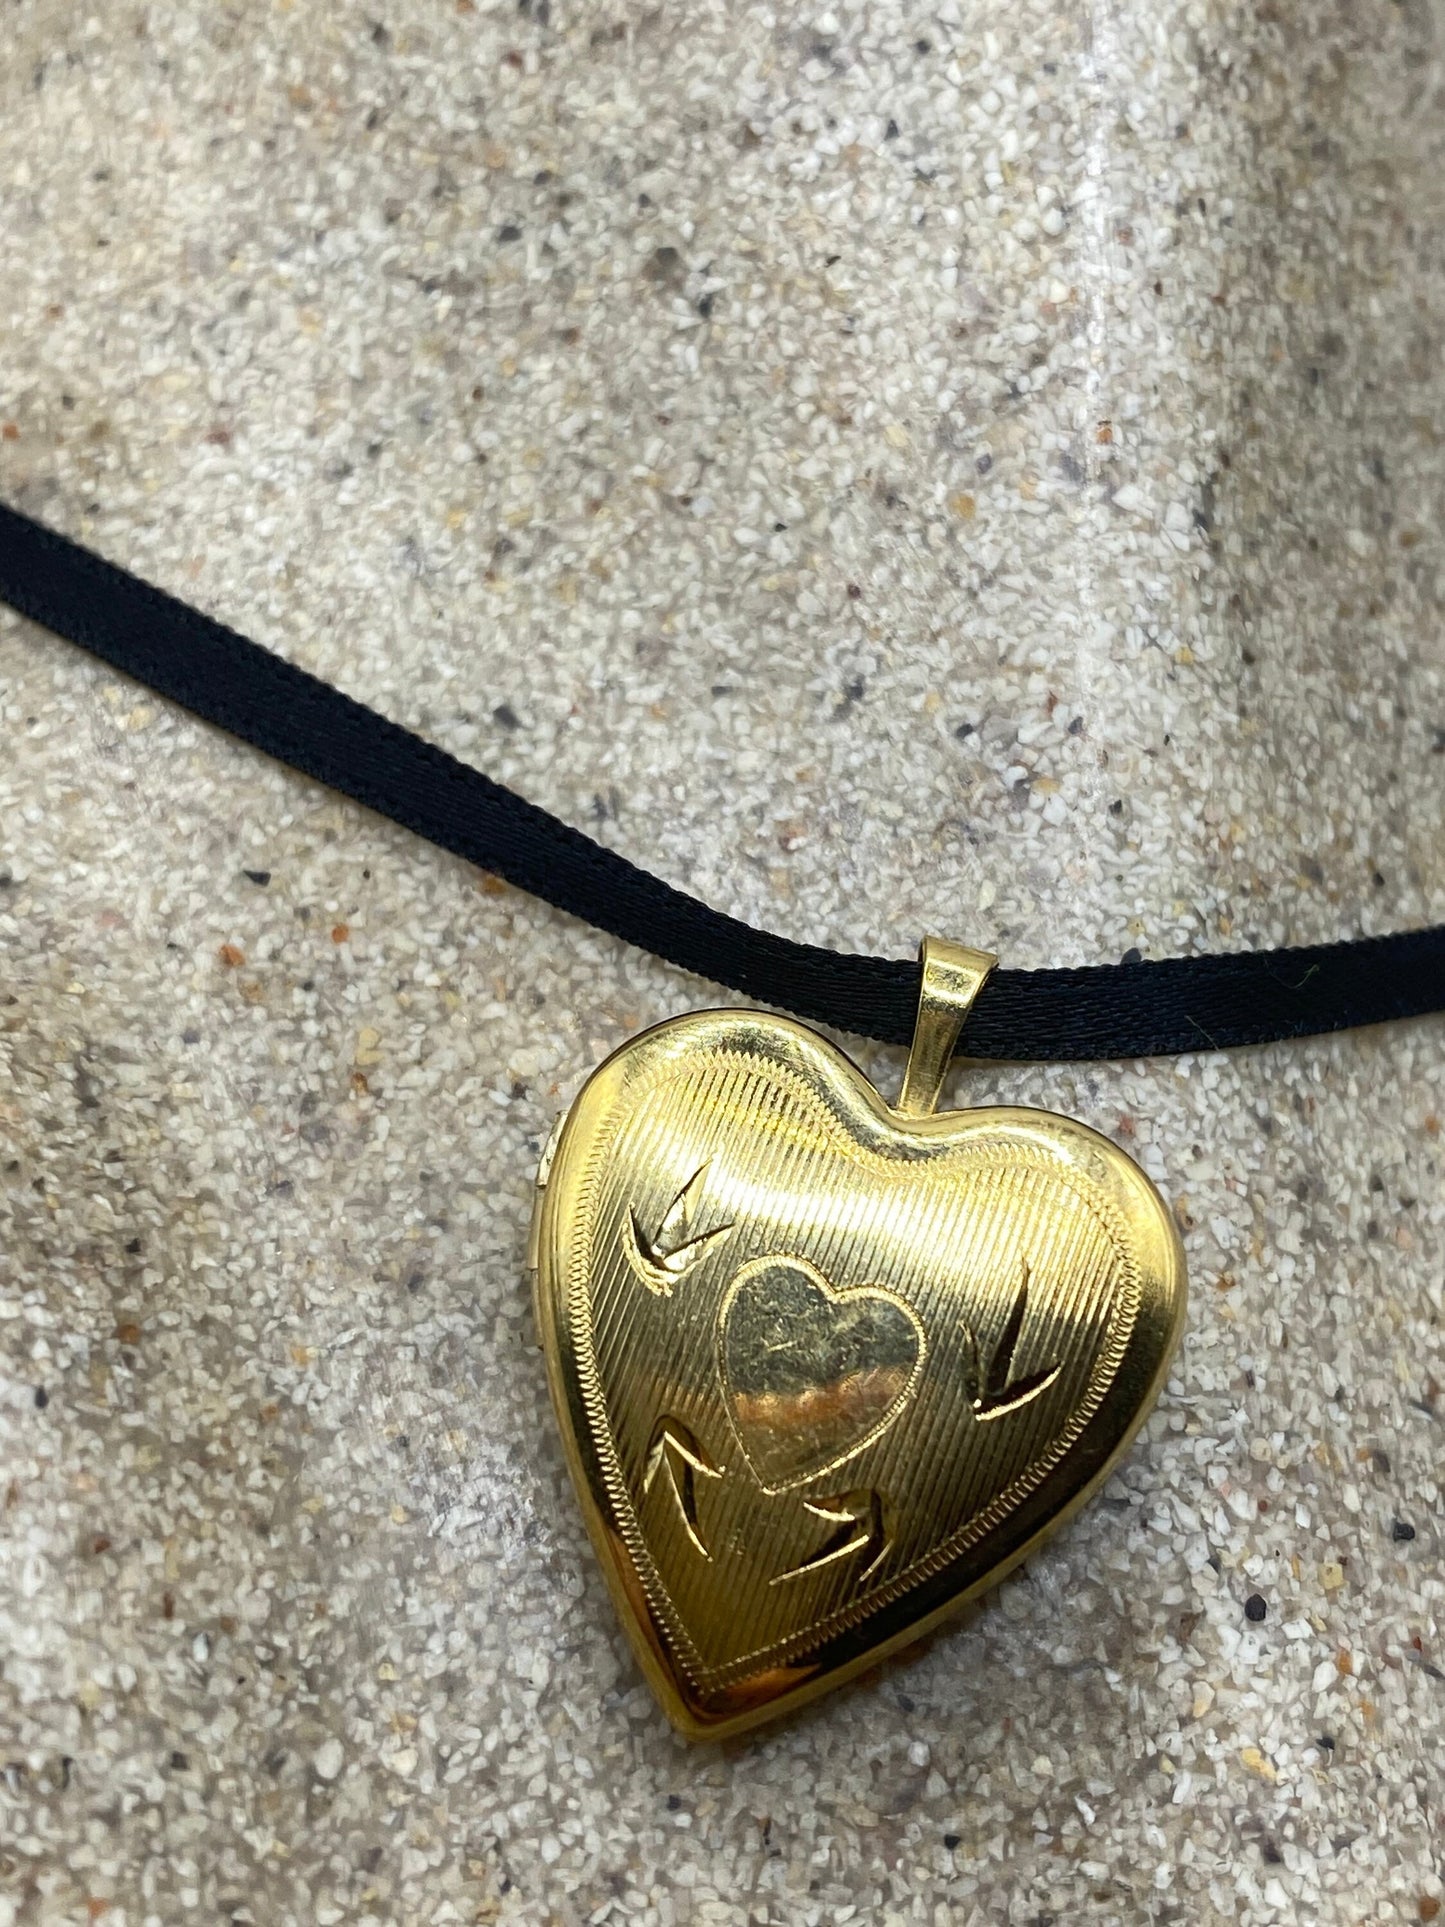 Vintage Gold Locket | Tiny Heart 9k Gold Filled Pendant Photo Memory Charm Engraved Arrows Hearts | Choker Necklace